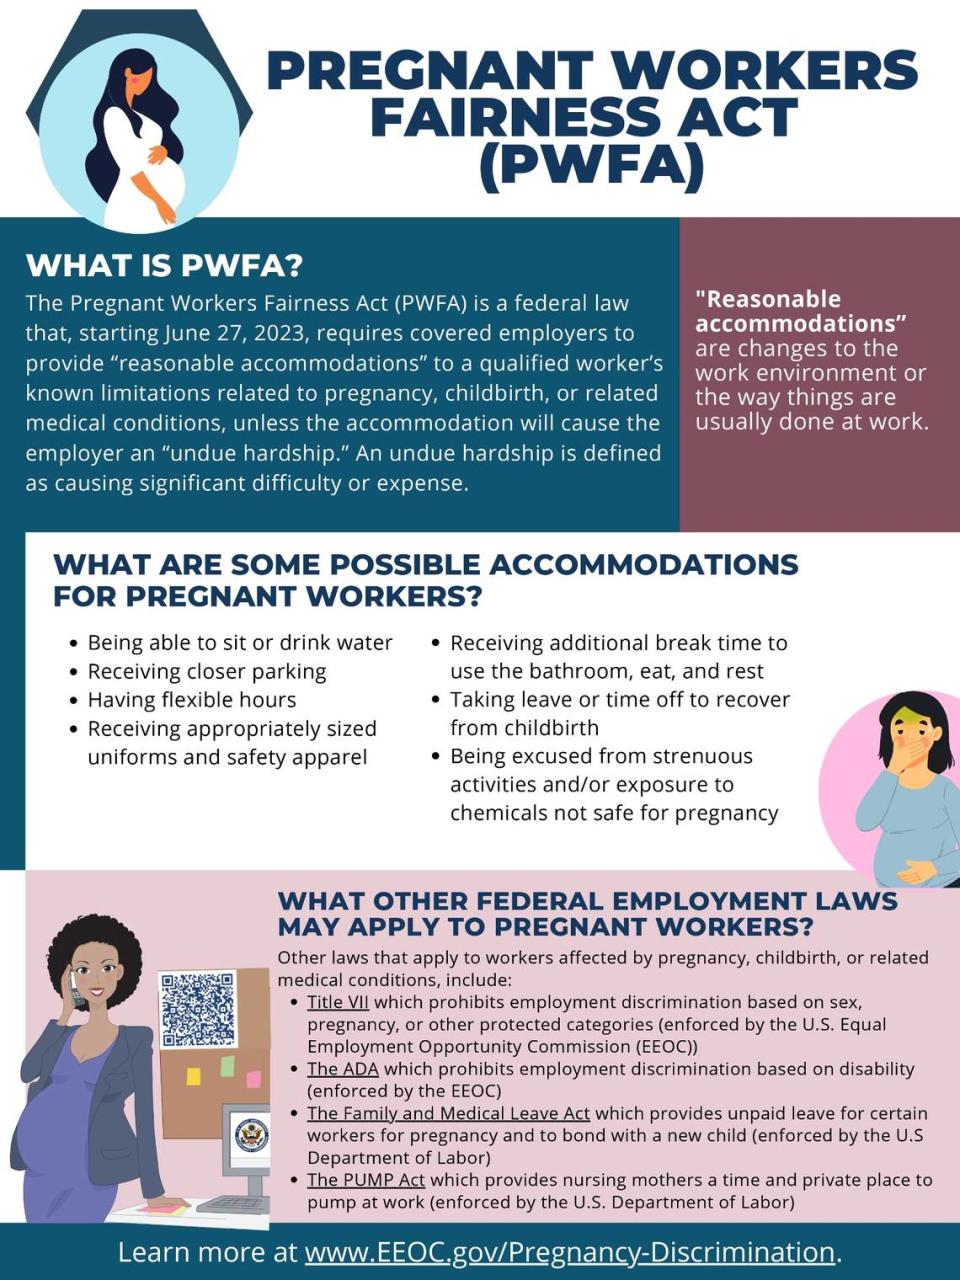 Information on the Pregnant Workers Fairness Act provided by the EEOC.